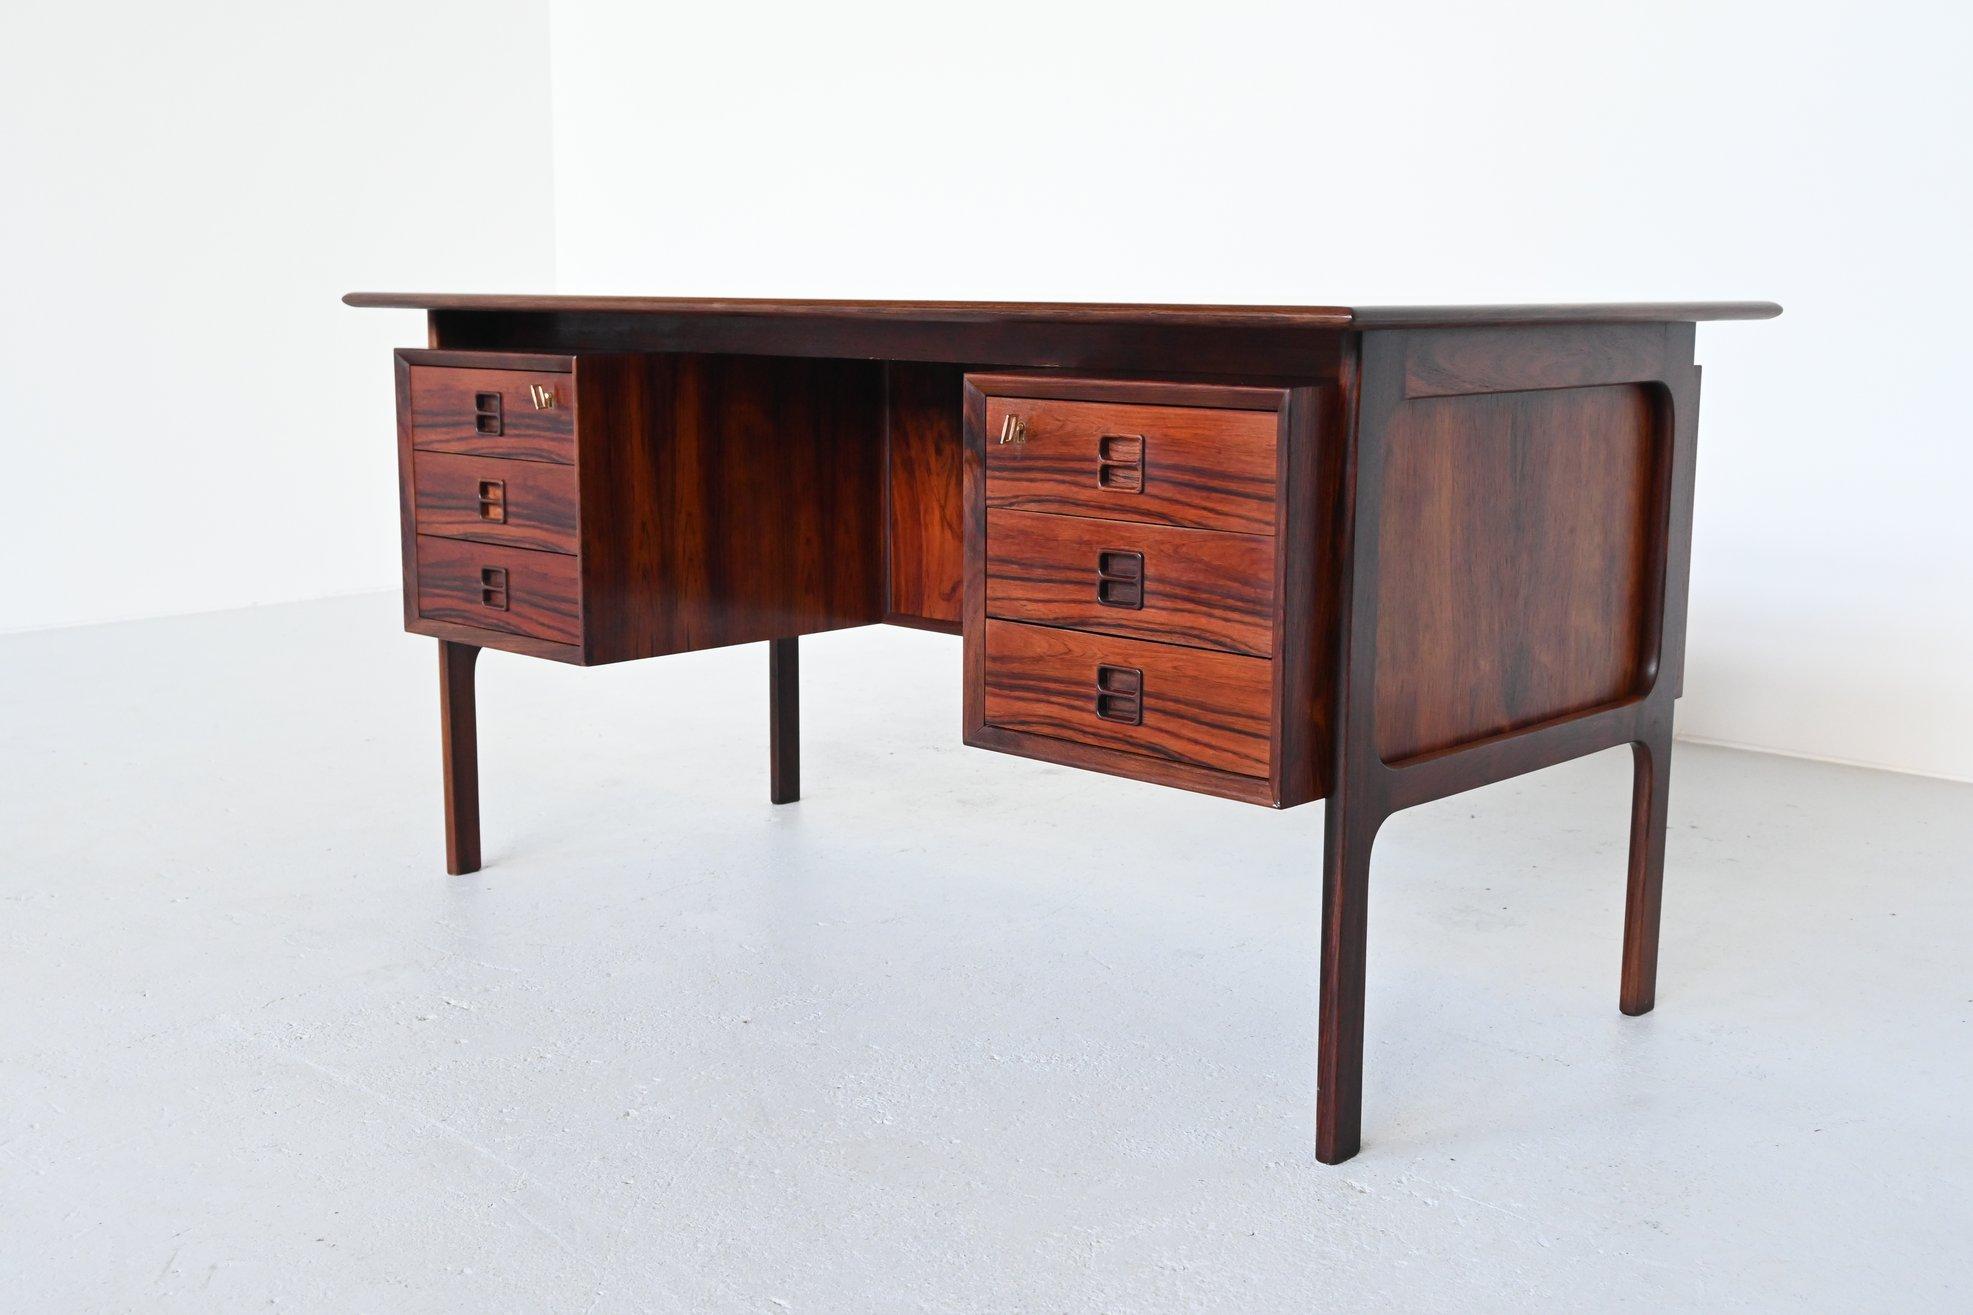 Very nicely crafted writing desk designed by Erik Brouer and manufactured by Brouer Møbelfabrik, Denmark, 1960. It’s made of rosewood and has a very nice grain to the wood. This symmetric desk has 6 drawers and 3 storage spaces at the back, complete